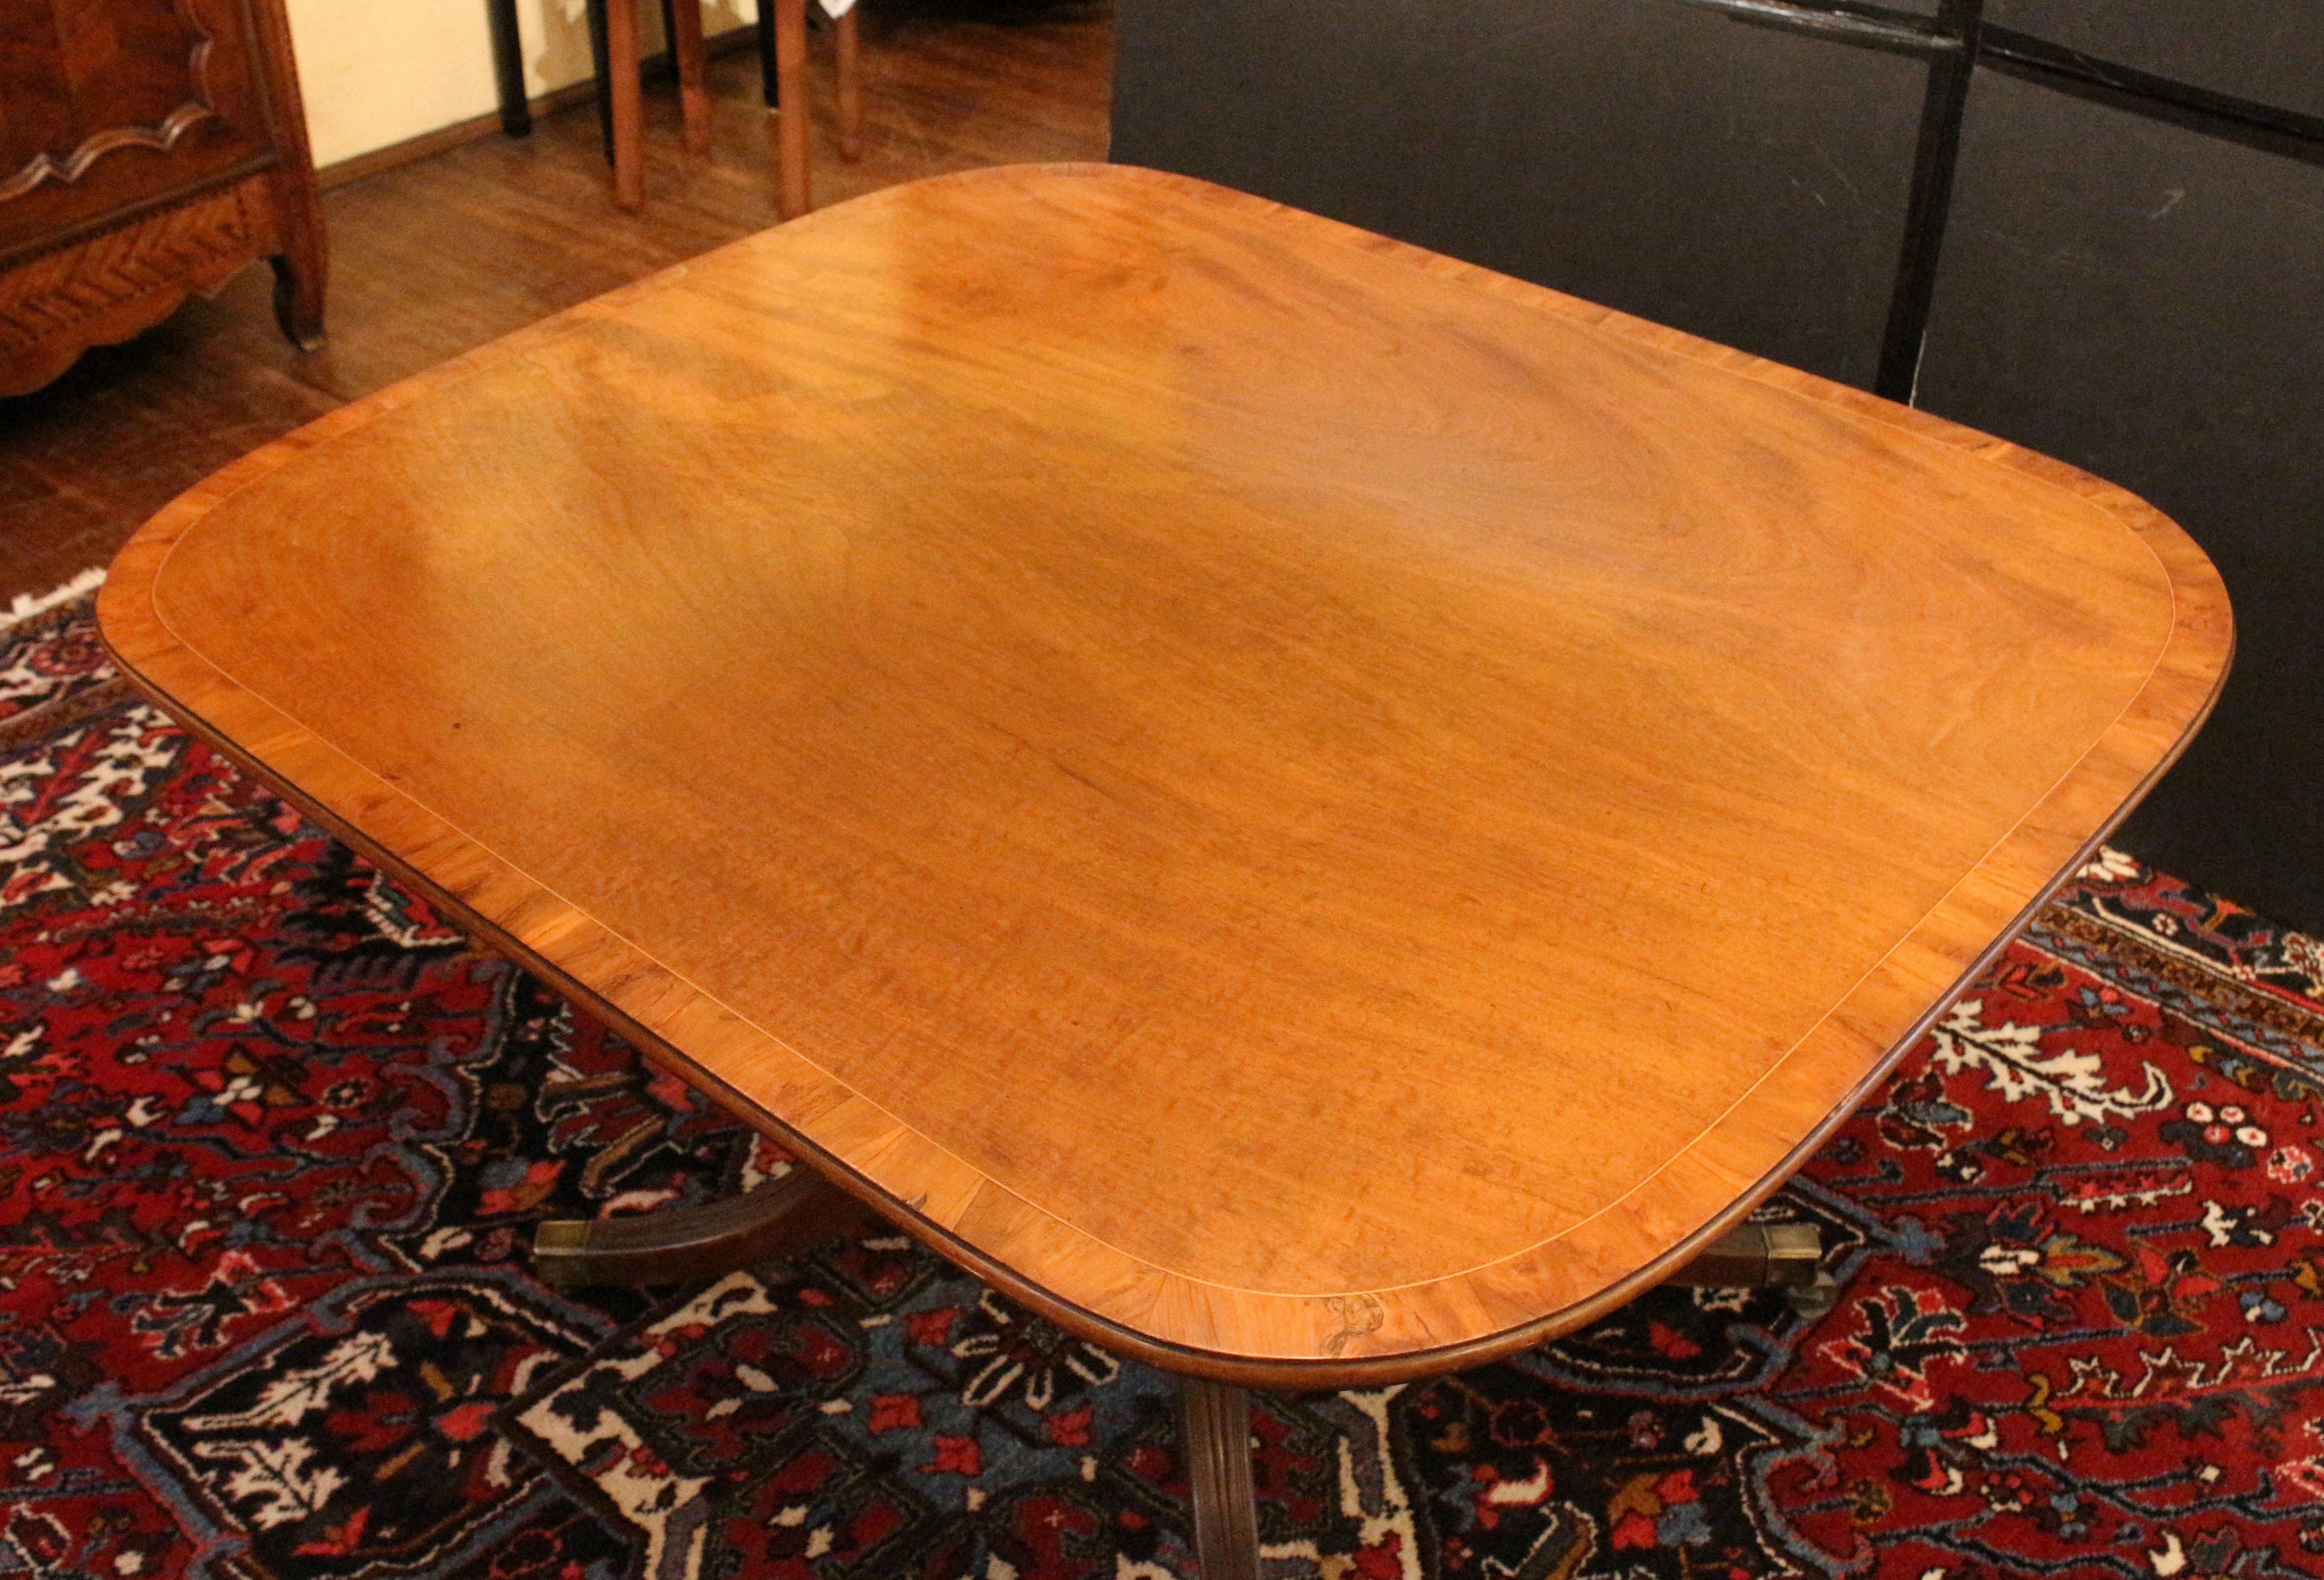 Circa 1800 Georgian tilt-top breakfast table or center table, English. Well figured mahogany cross-banded with yew wood set off by boxwood stringing; molded edge. Sturdy pedestal with well turned upright and 4 outswept, elegantly reeded legs ending